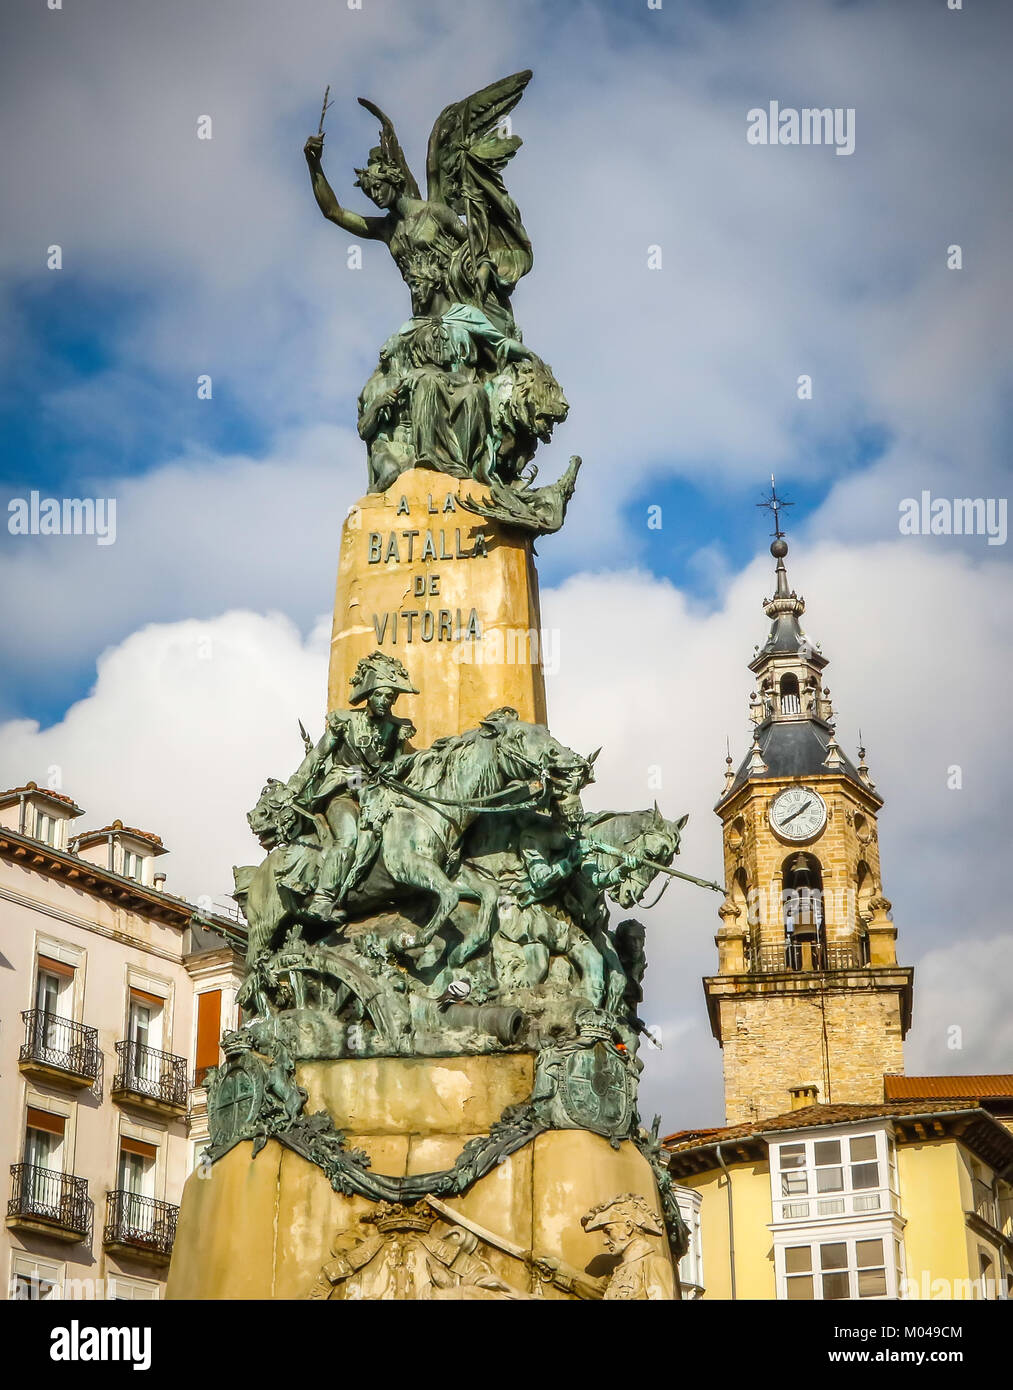 Vitoria, Spain - January 12, 2018: Virgen Blanca square in Vitoria. Vitoria-Gasteiz is the capital of the Autonomous Community of the Basque Country a Stock Photo